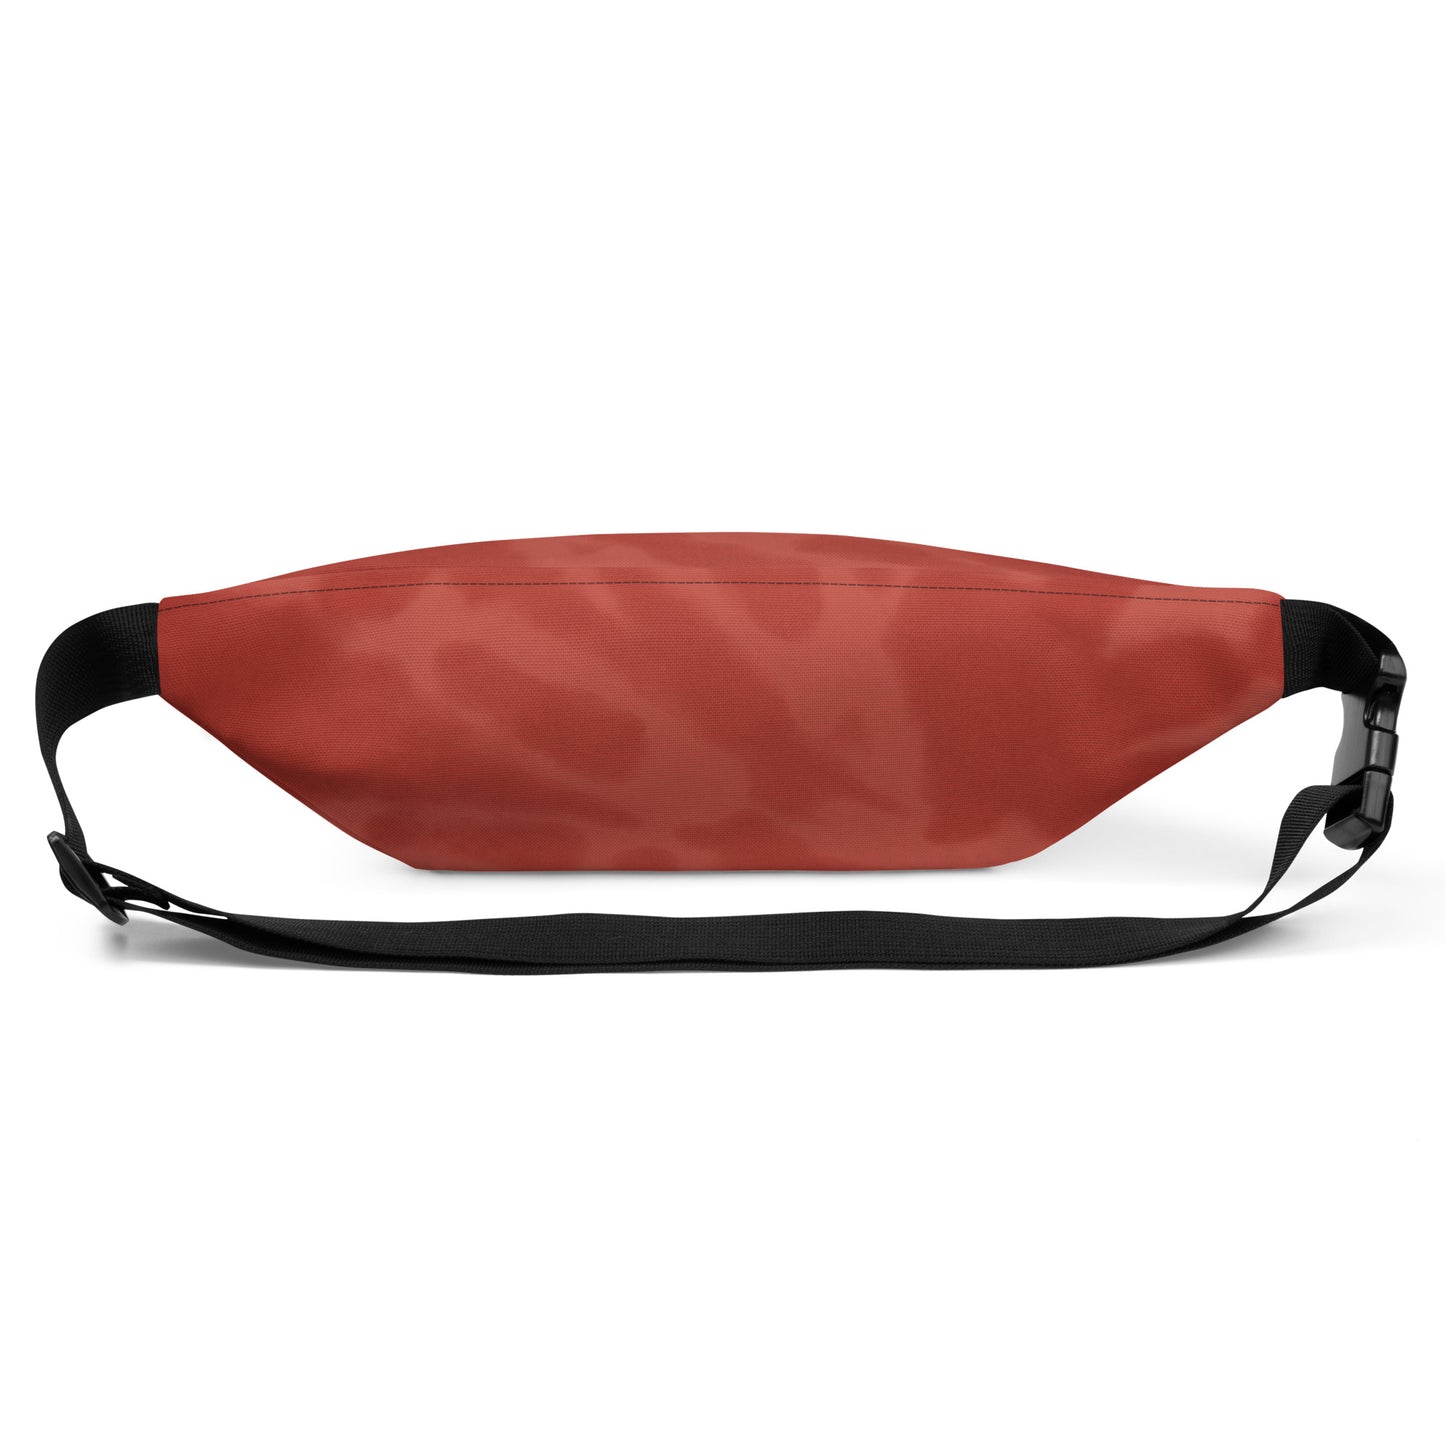 Travel Gift Fanny Pack - Red Tie-Dye • YHM Hamilton • YHM Designs - Image 09